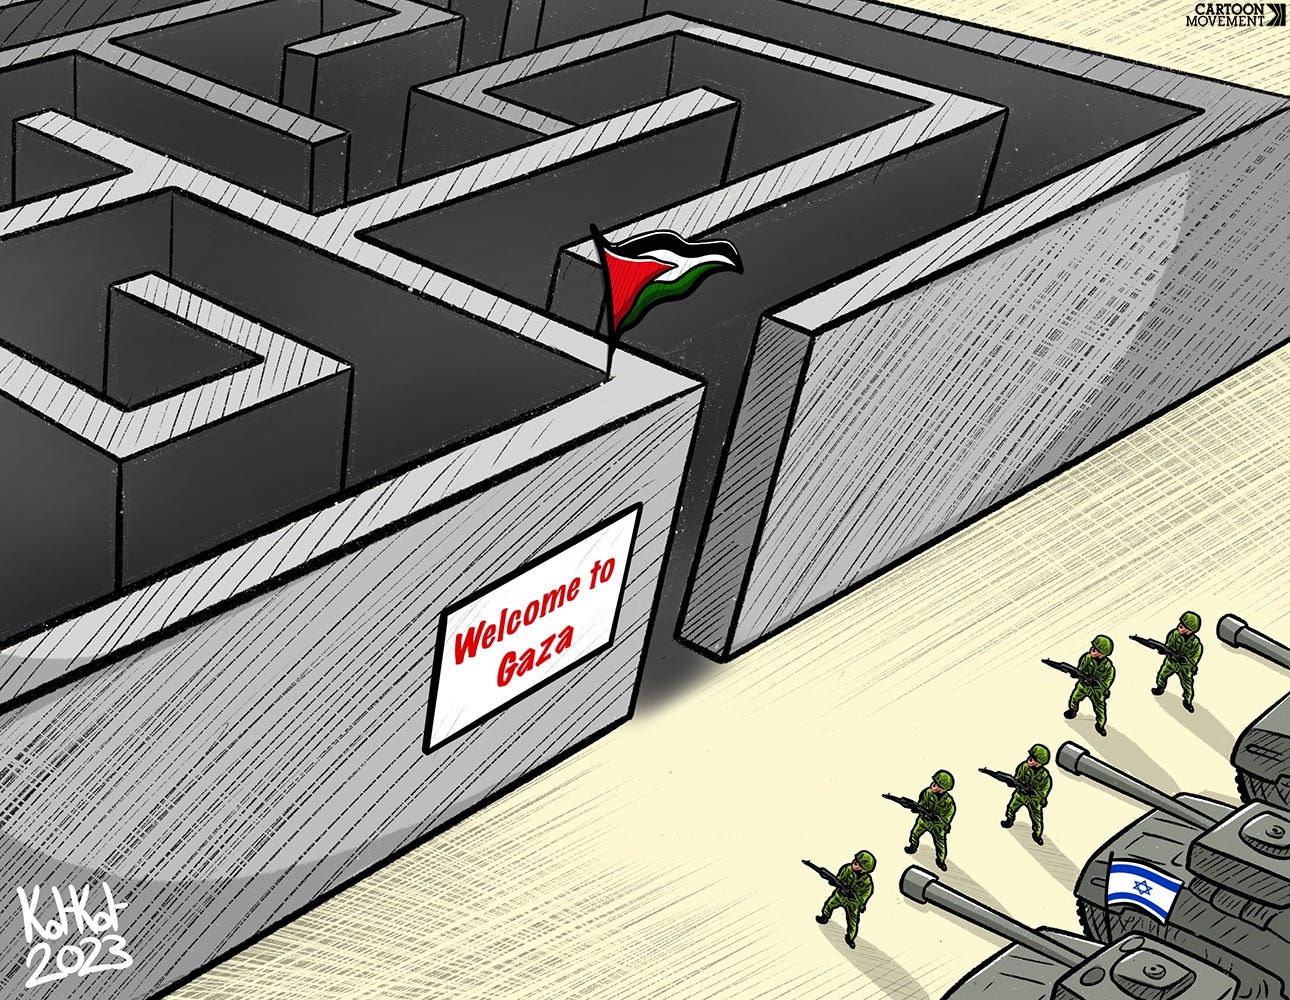 Cartoon showing Israeli tanks standing at the entrance of a giant maze with the sign "Welcome to Gaza".